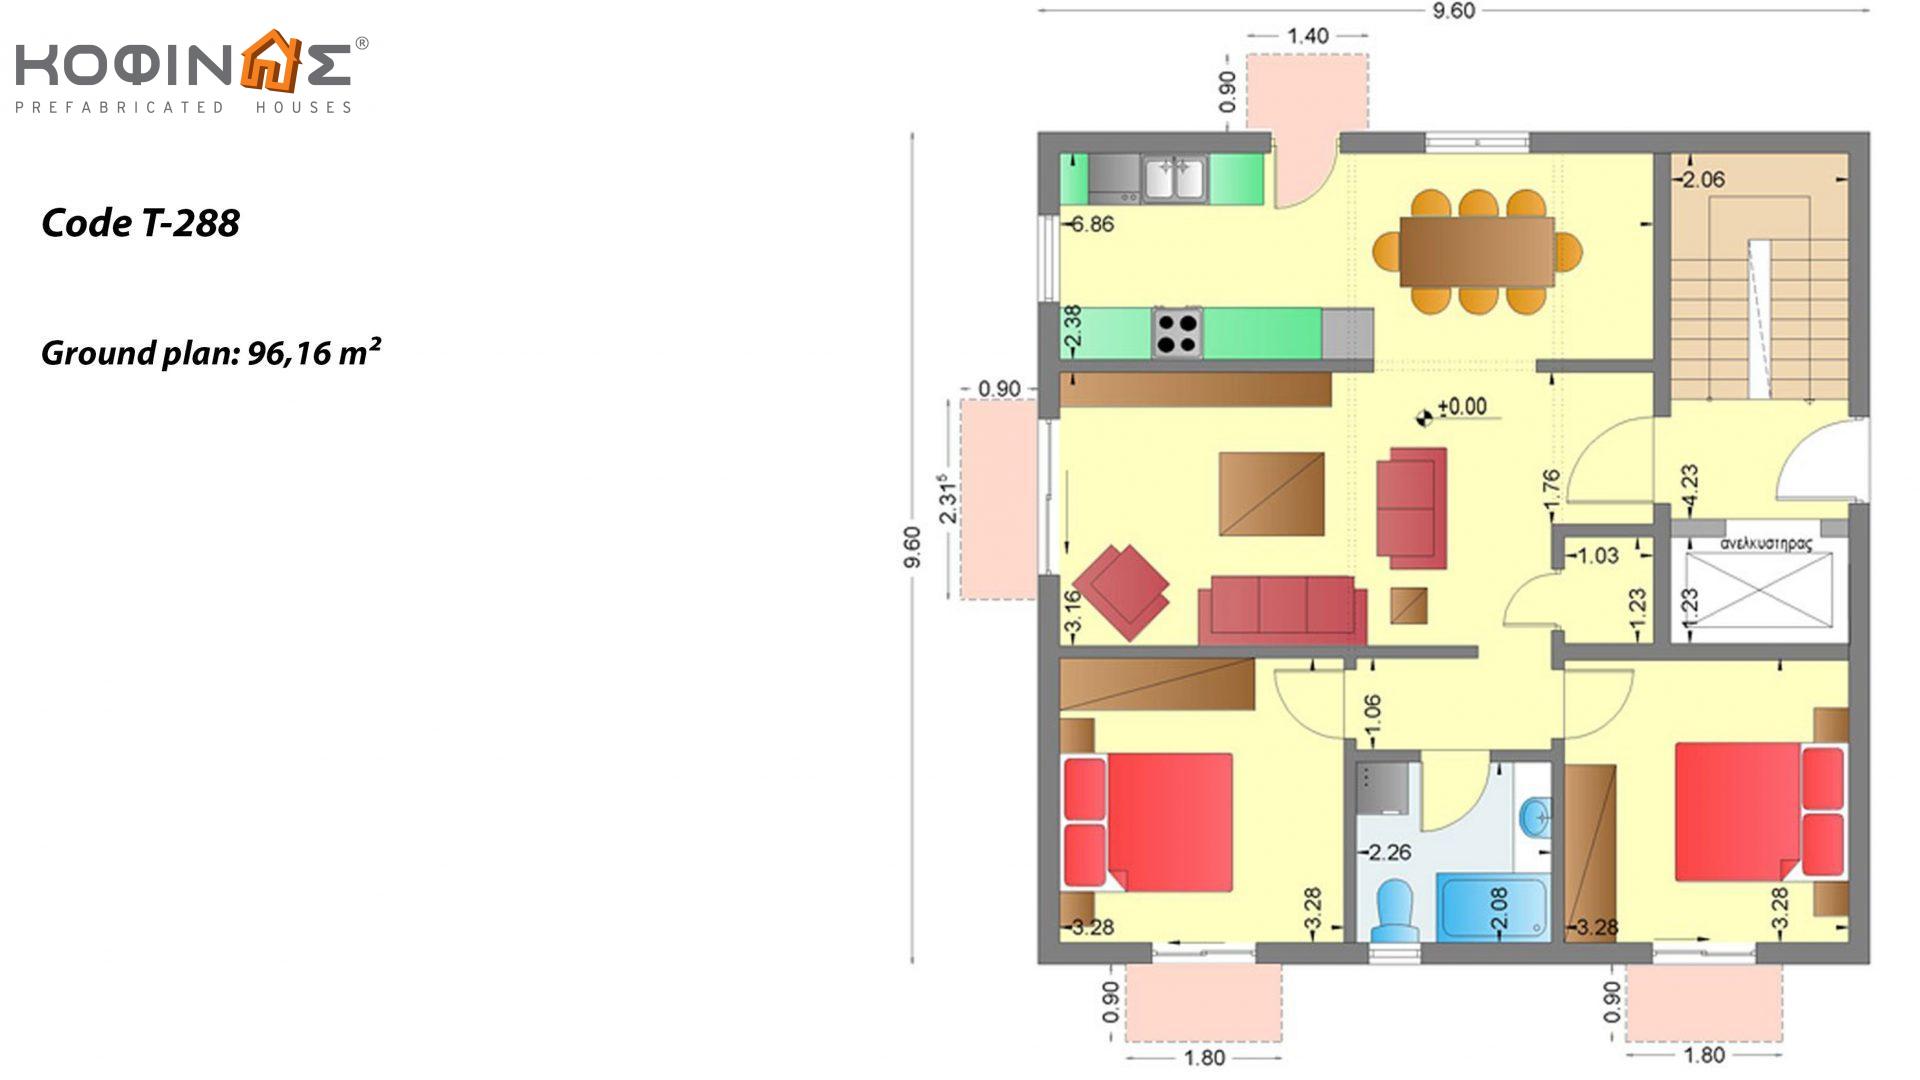 3-story house T-288, total surface of 288,48 m²,covered areas 13,20 m²,balcony 13.20 m²